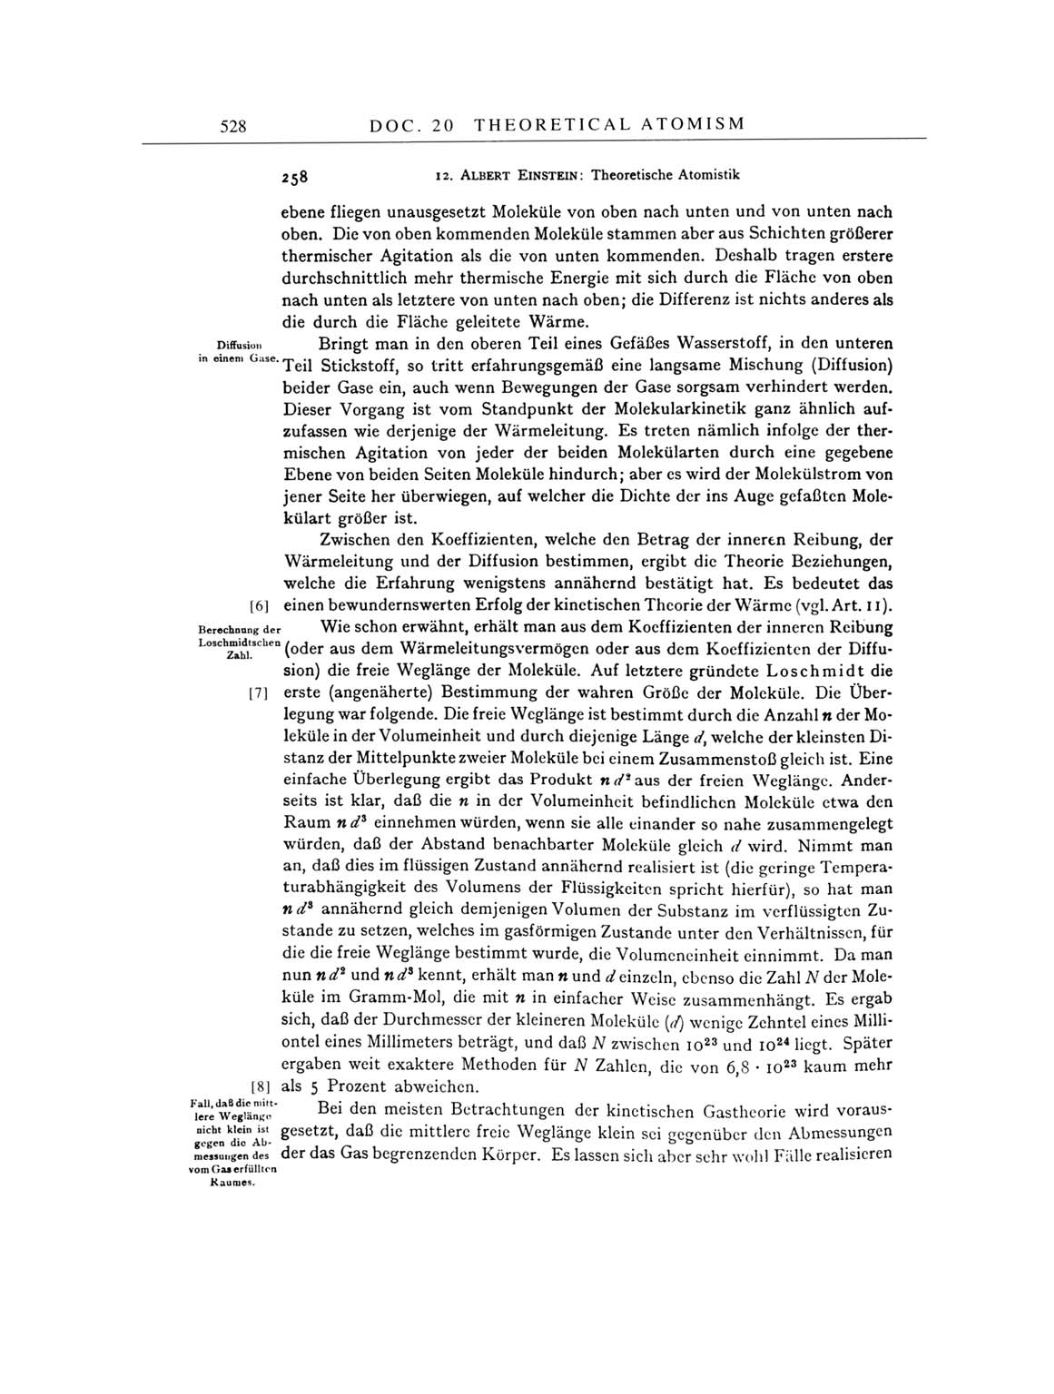 Volume 4: The Swiss Years: Writings 1912-1914 page 528